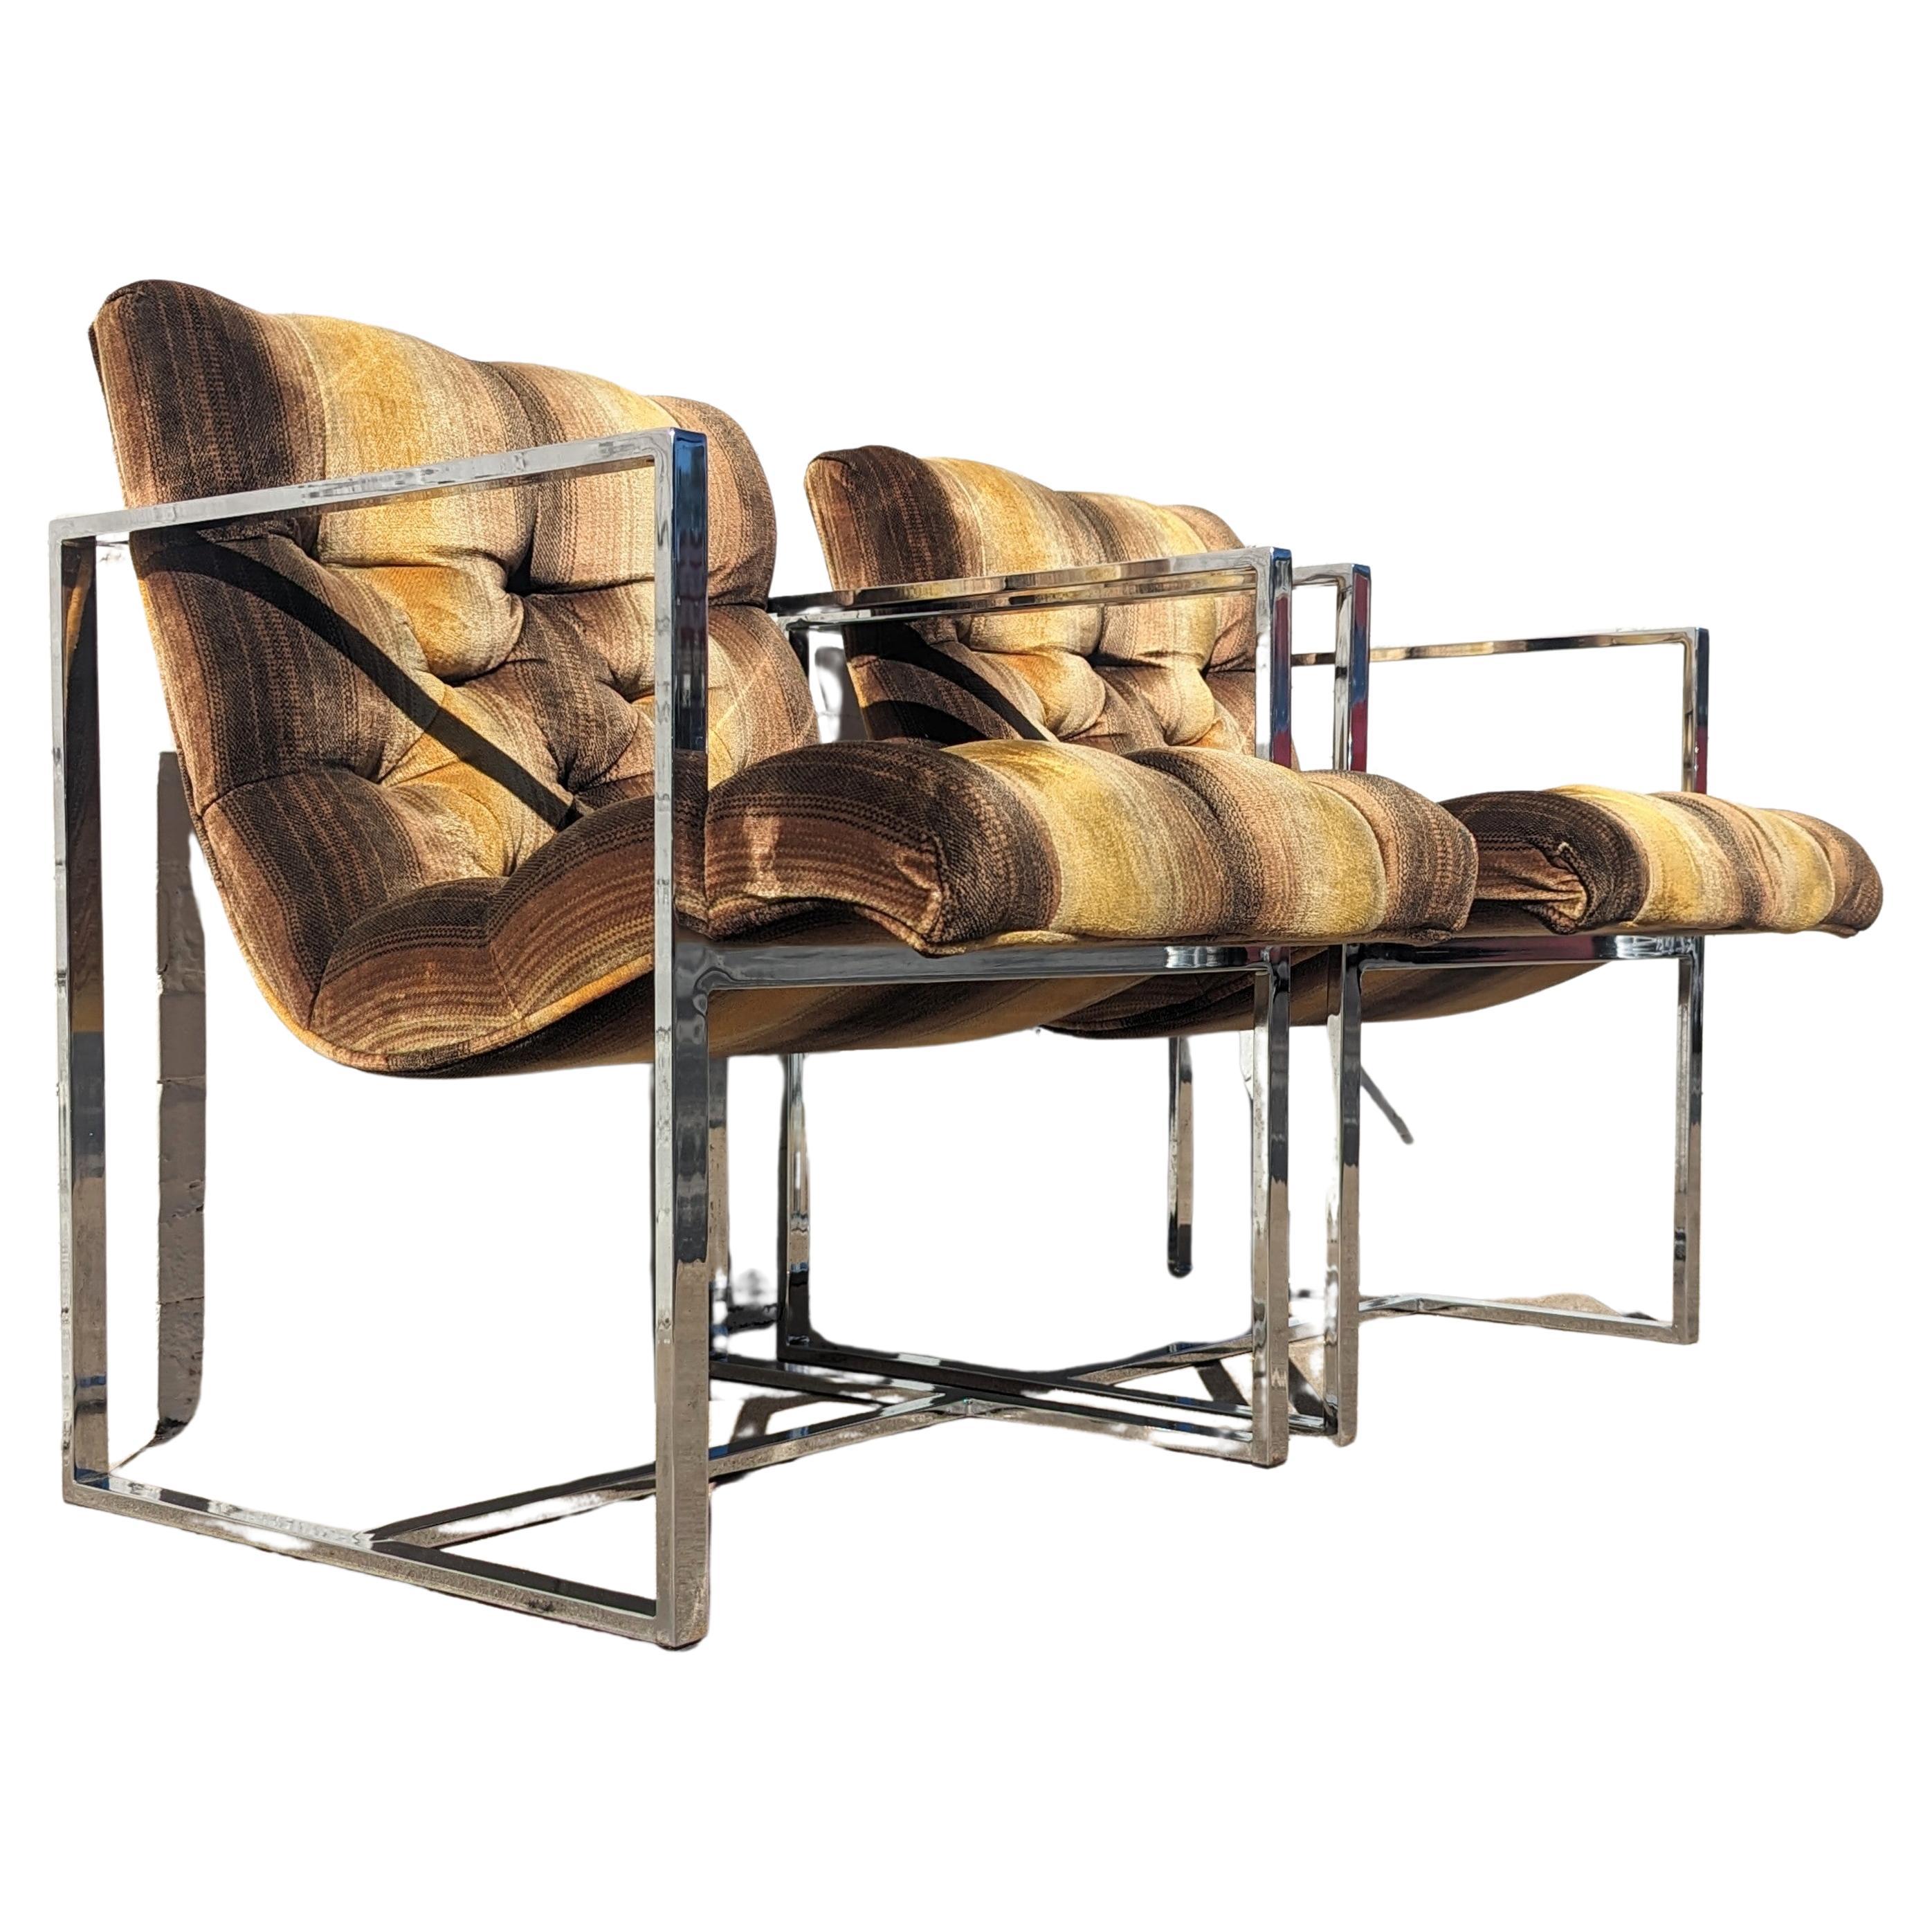 Milo Baughman stainless steel and velvet scoop chairs.  Above average condition and structurally sound. Stainless steel frames have very little wear. I believe this to be the original fabric and it has very little wear with no cuts or tears. There